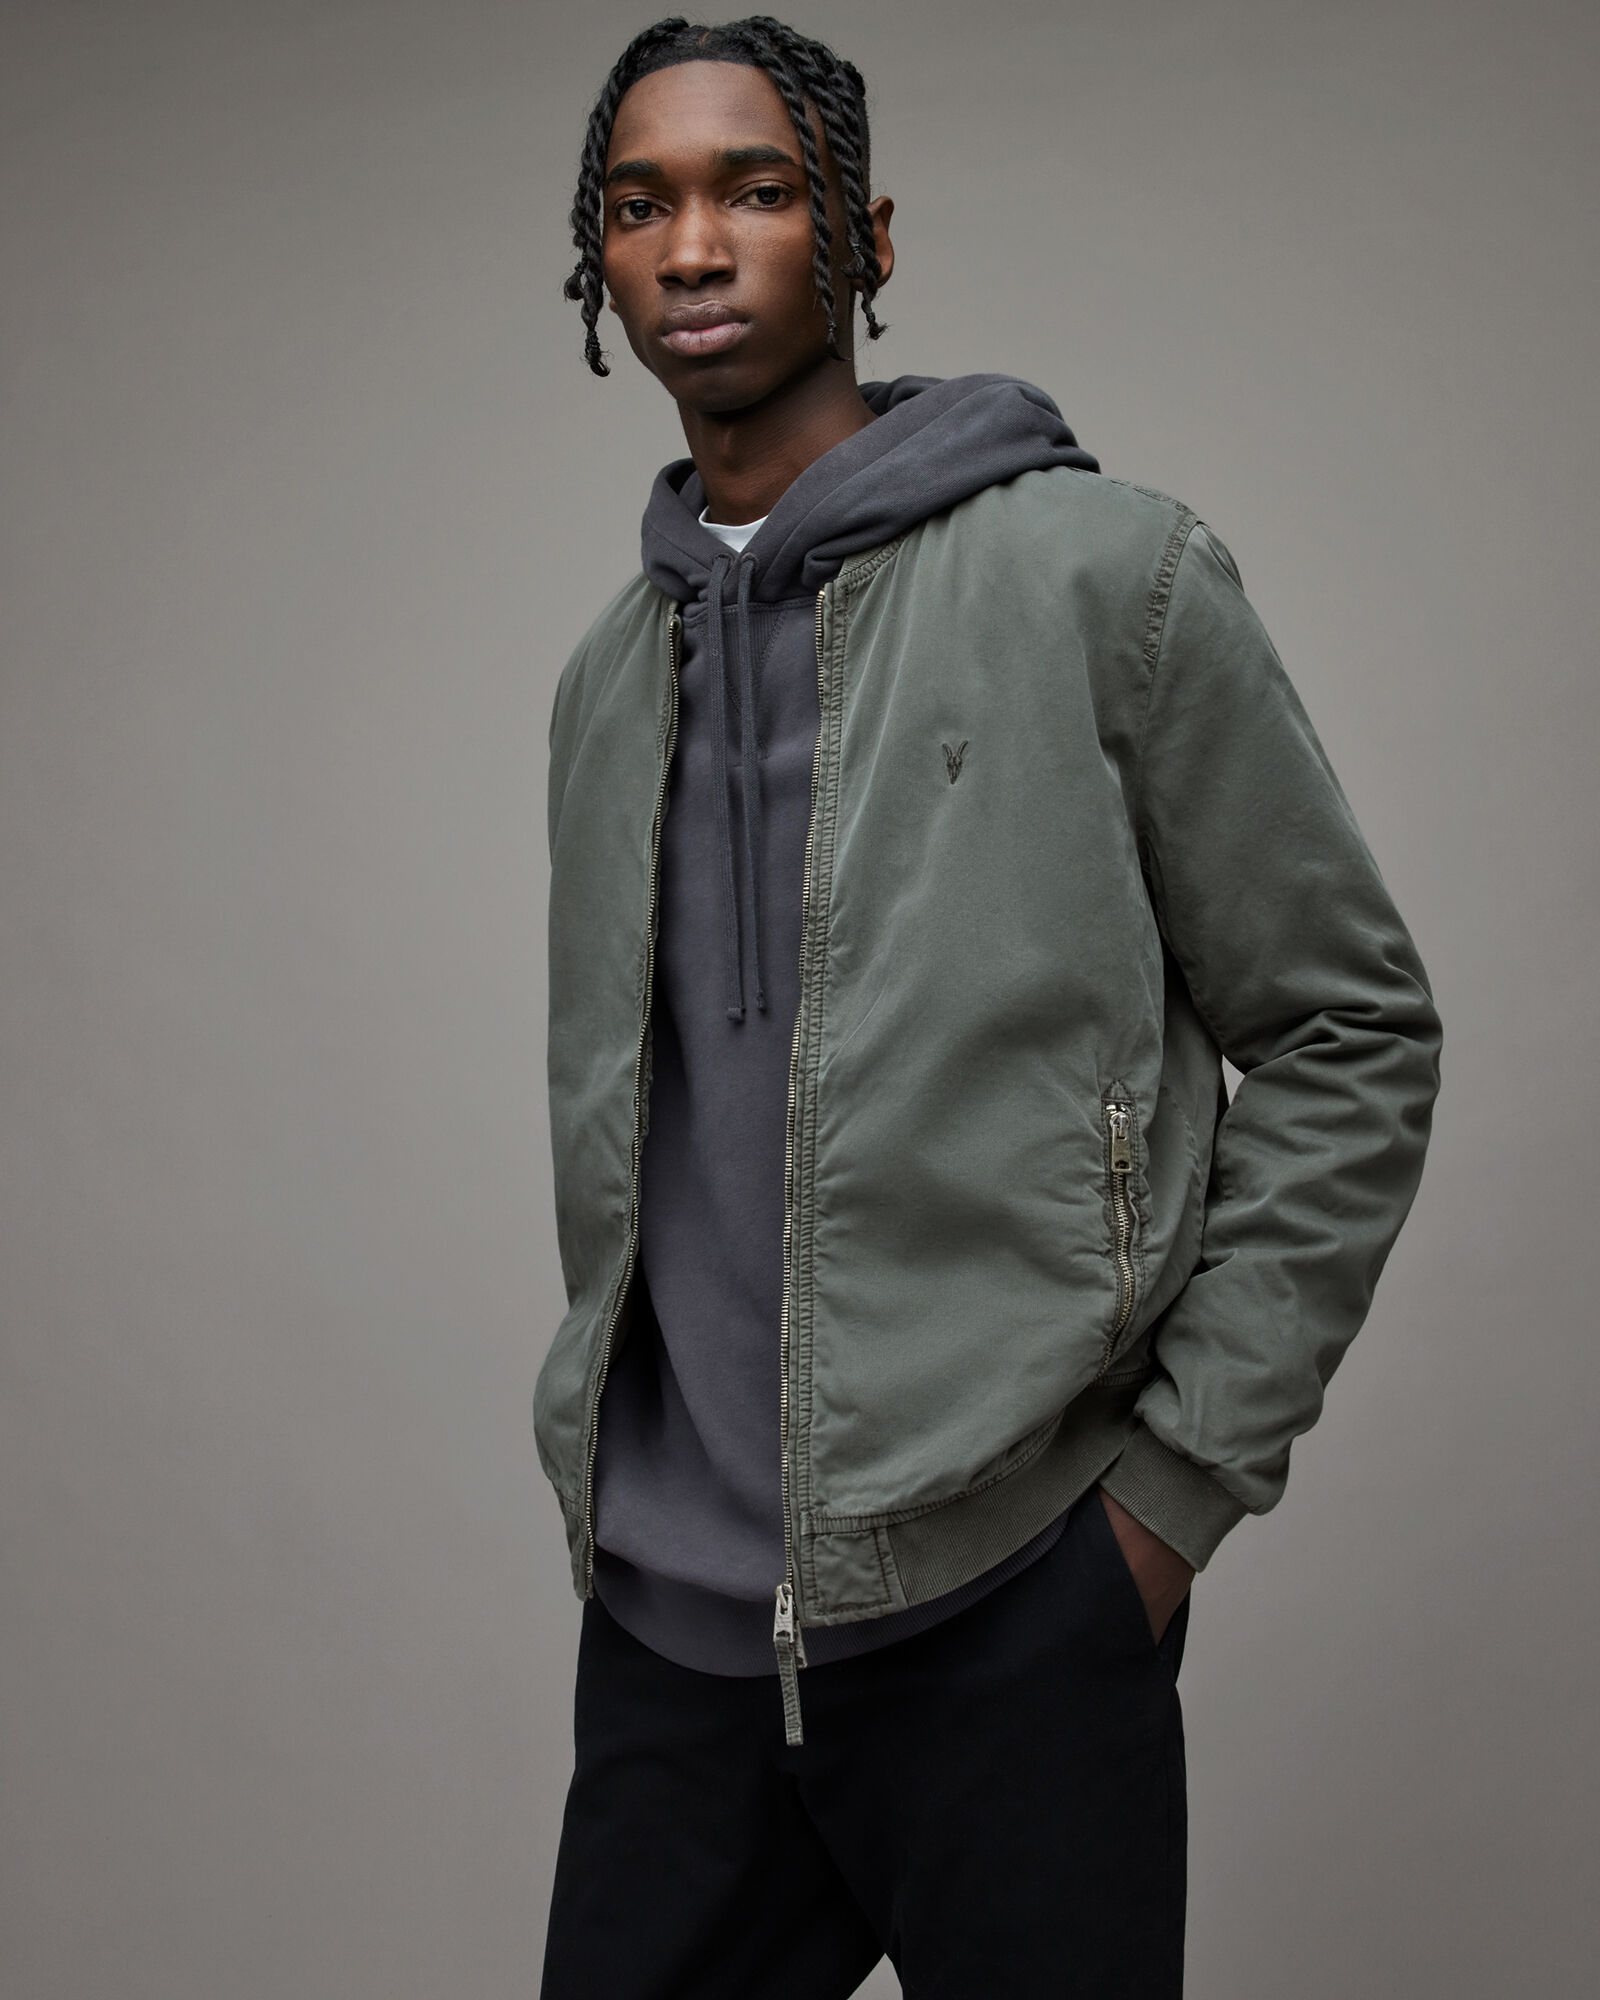 Lows Bomber Jacket PIPE GREY | ALLSAINTS